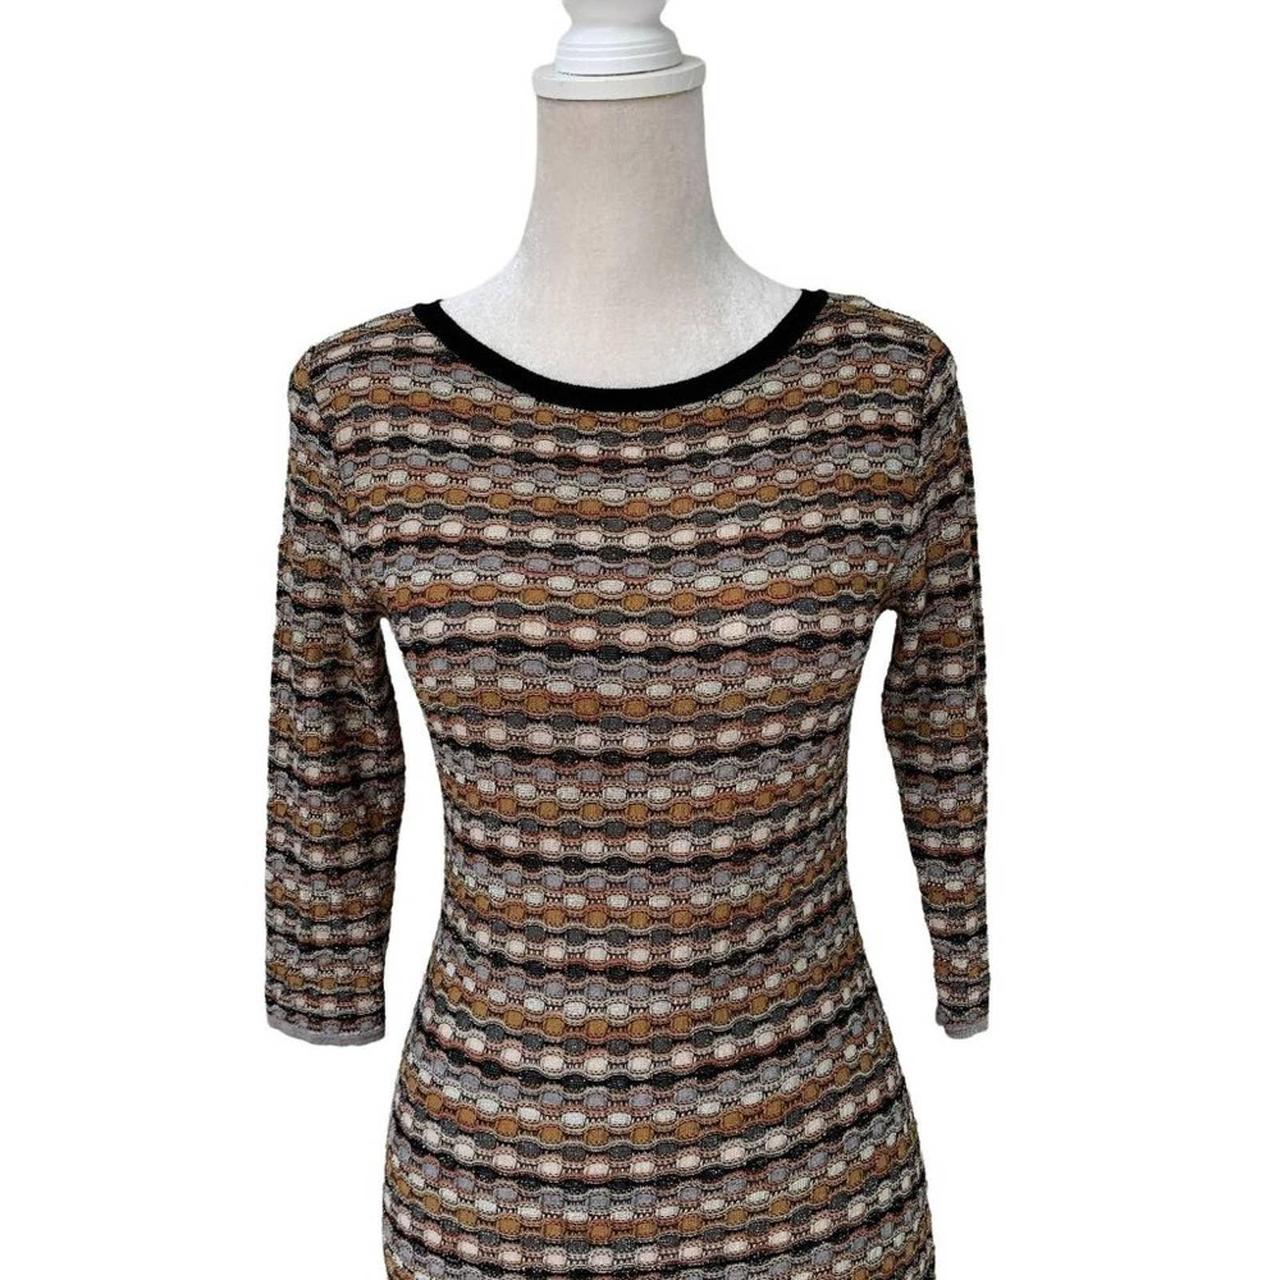 Product Image 2 - MISSONI 3/4 sleeve brown gold